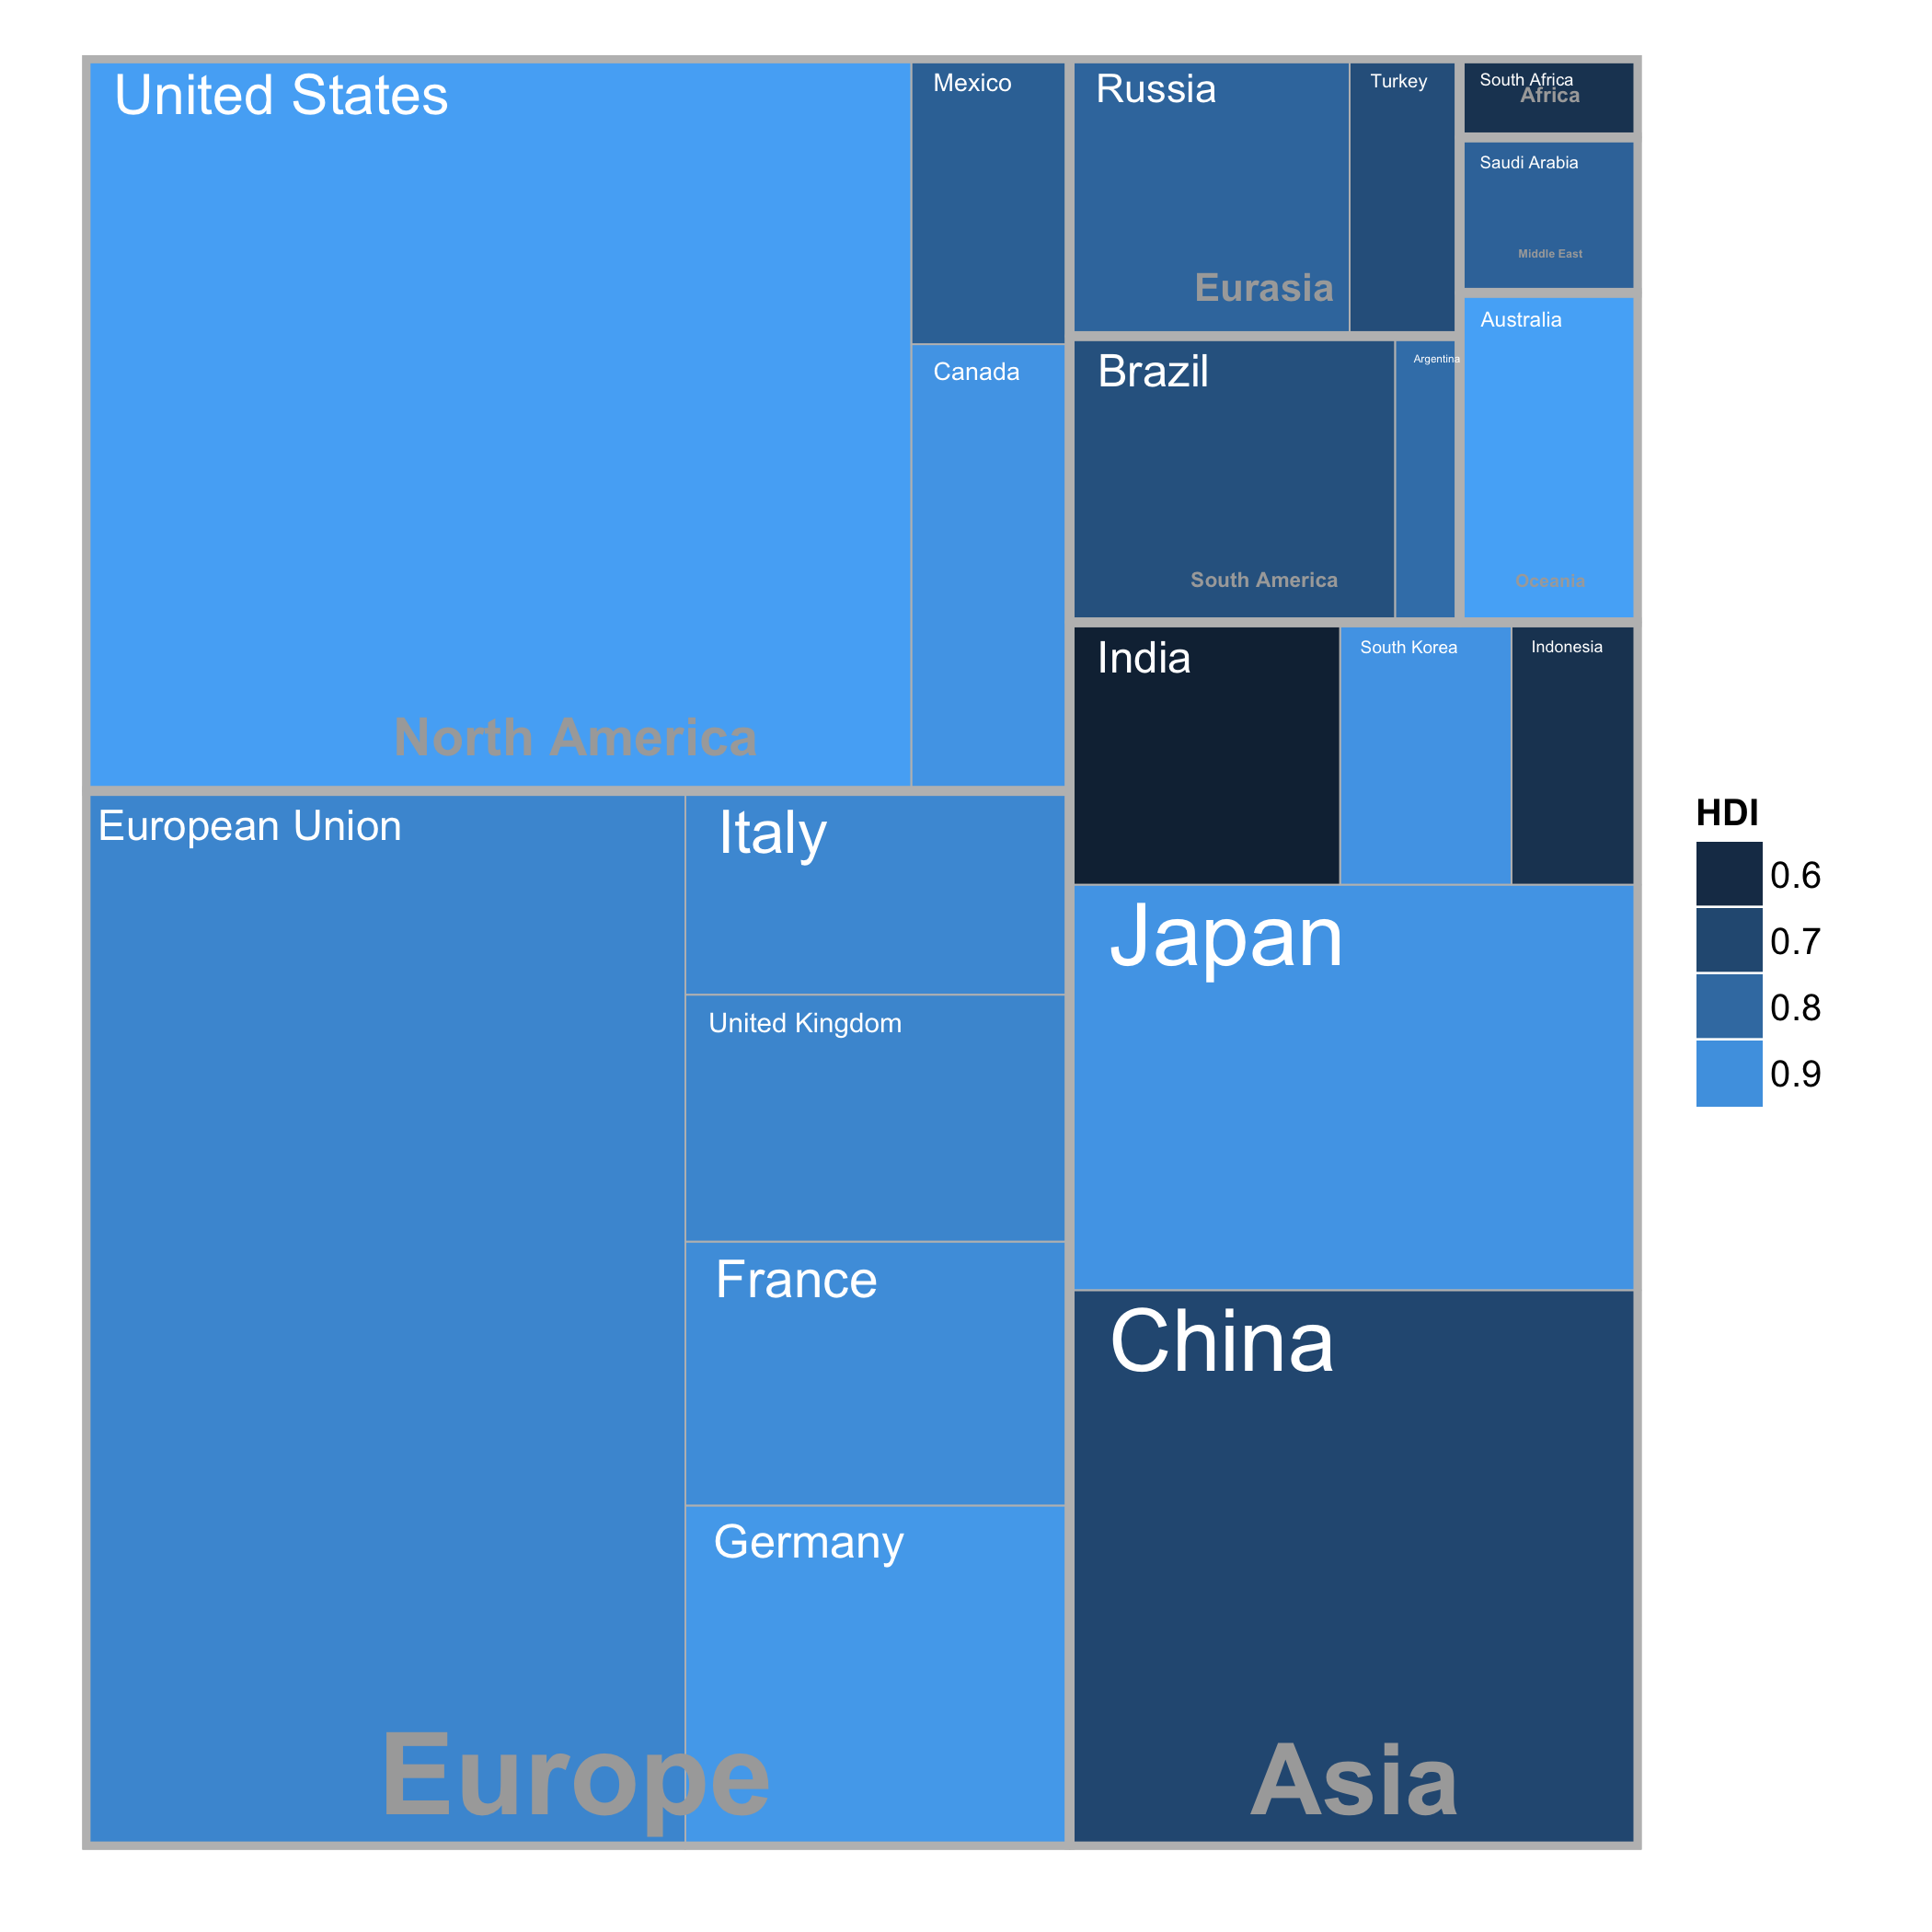 Treemap of G20 data, produced with ggplotify